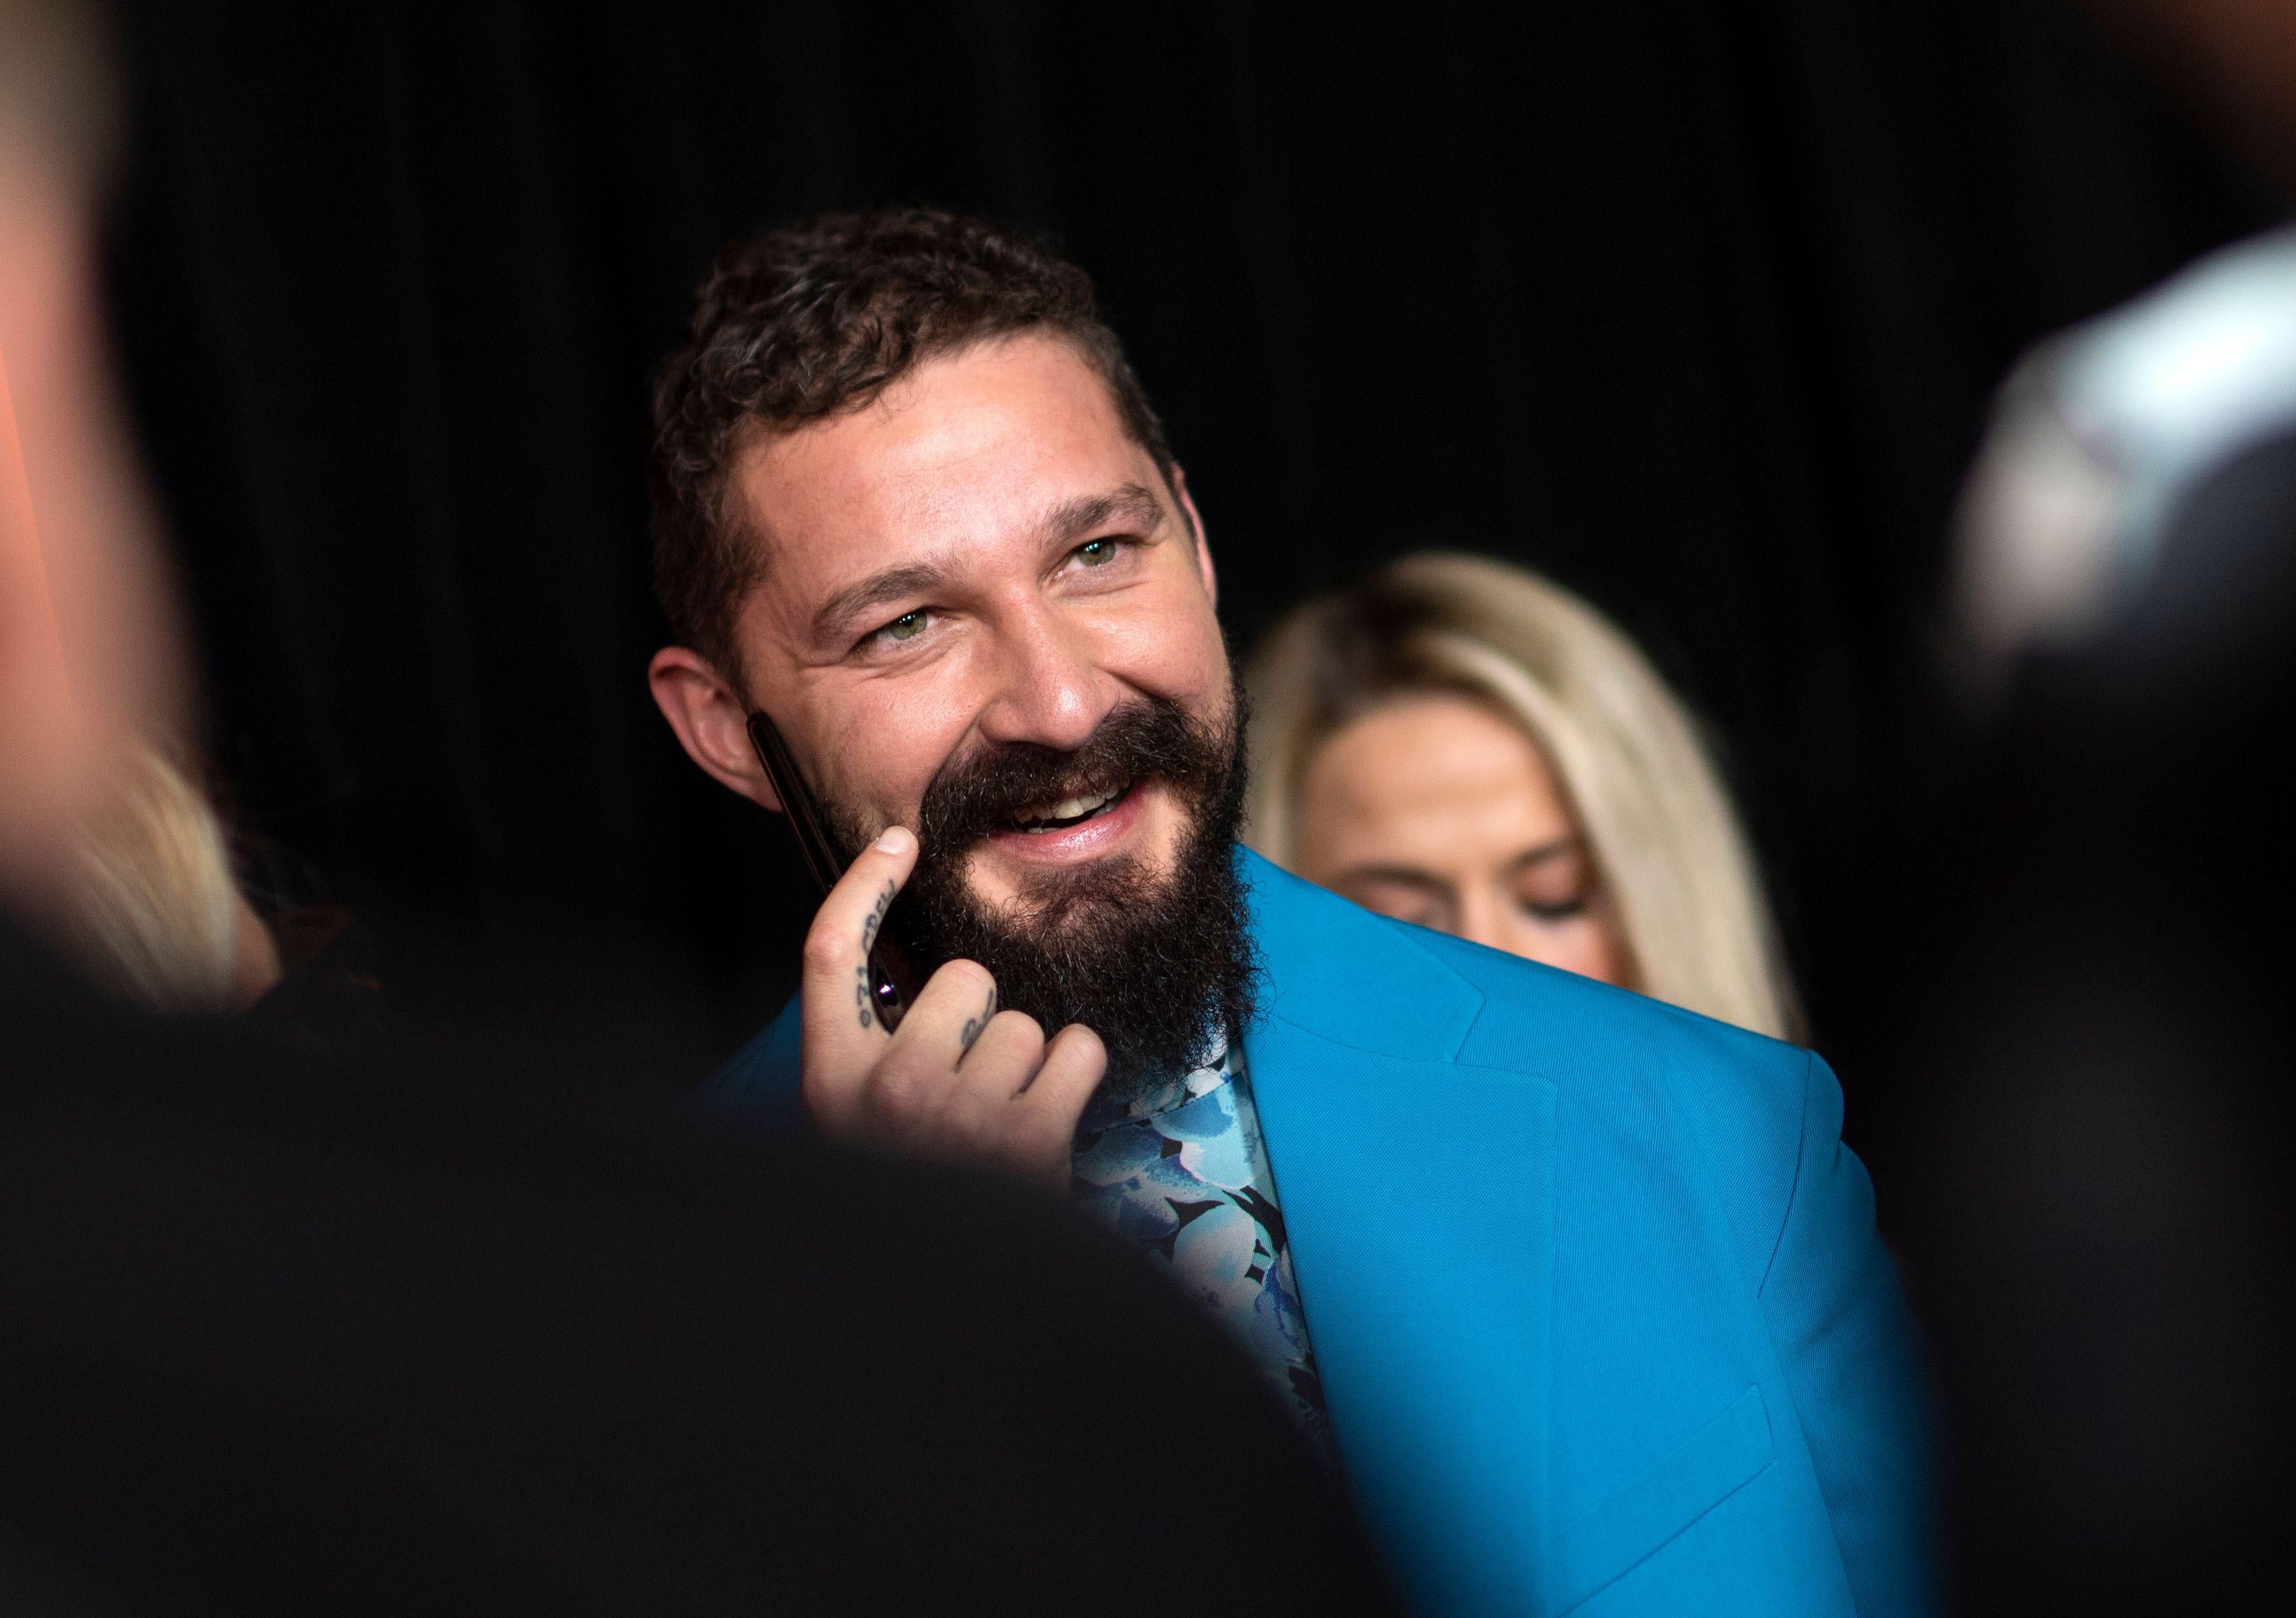 Shia LaBeouf, in a beard and blue suit, scratches his face and smiles.